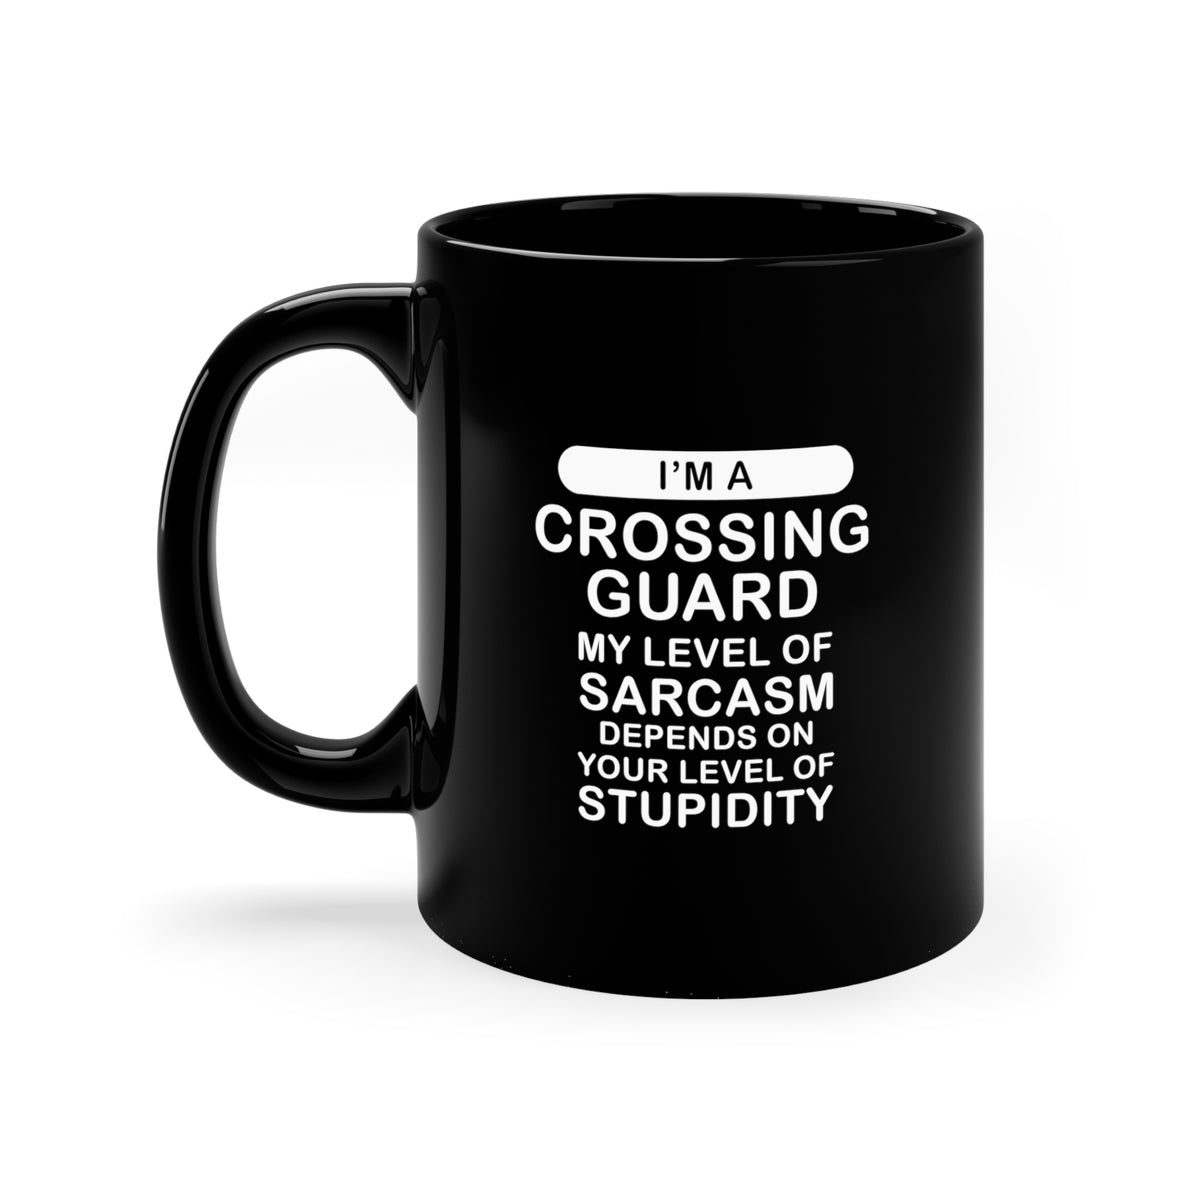 Crossing guard Black Coffee Mug - My Level of Sarcasm - Birthday, Christmas Gifts For Crossing guard Coworkers, Colleagues, Men, Women, Mom, Dad